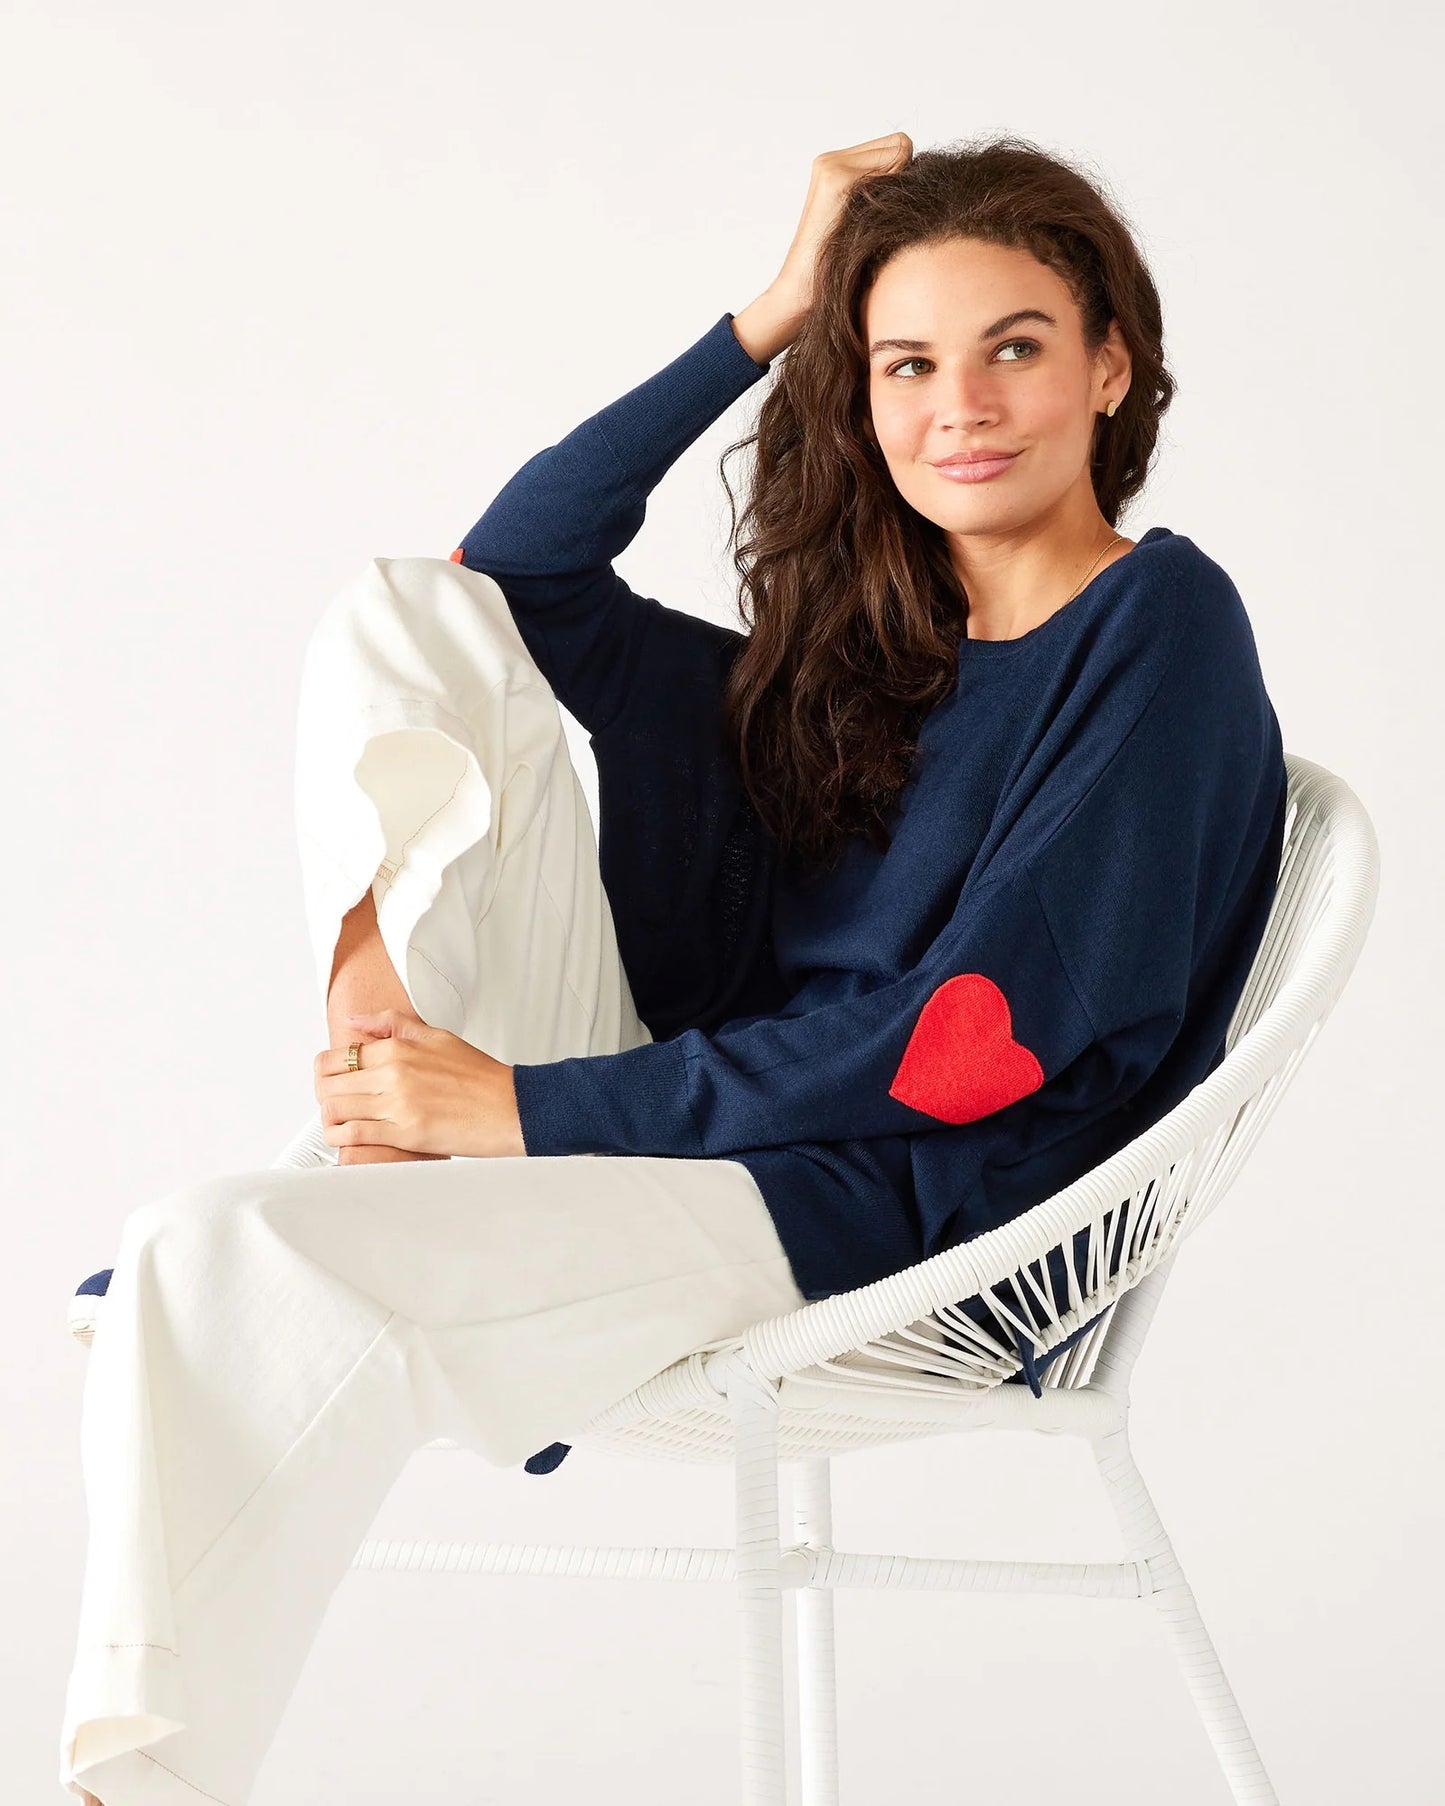 Amour Sweater - Navy by MERSEA